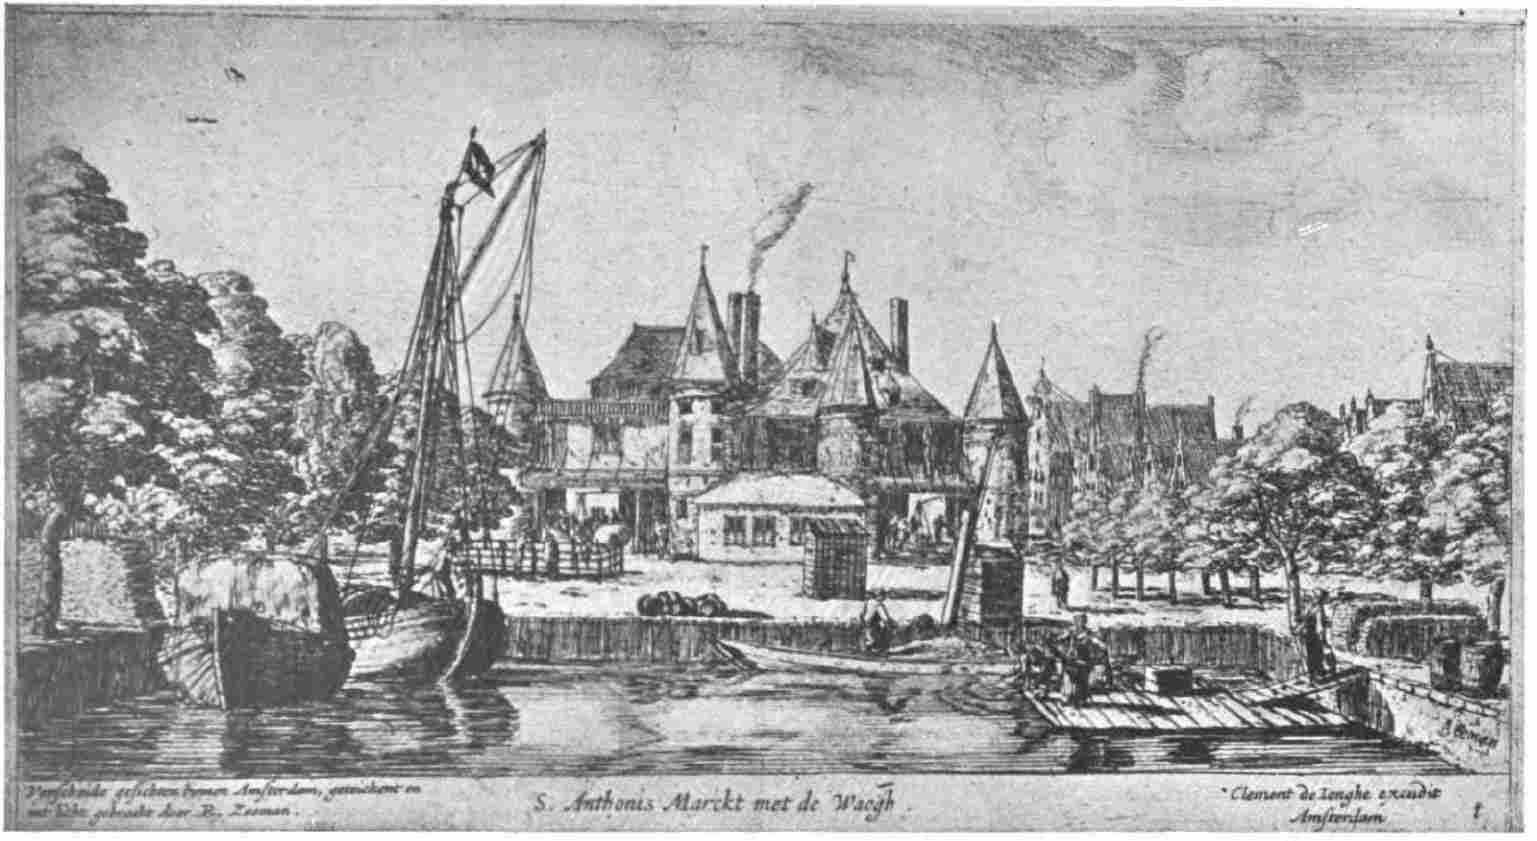 Plate 15. The St. Anthony-Market in Amsterdam, with the Old Gate Transformed into a Weighing-House.